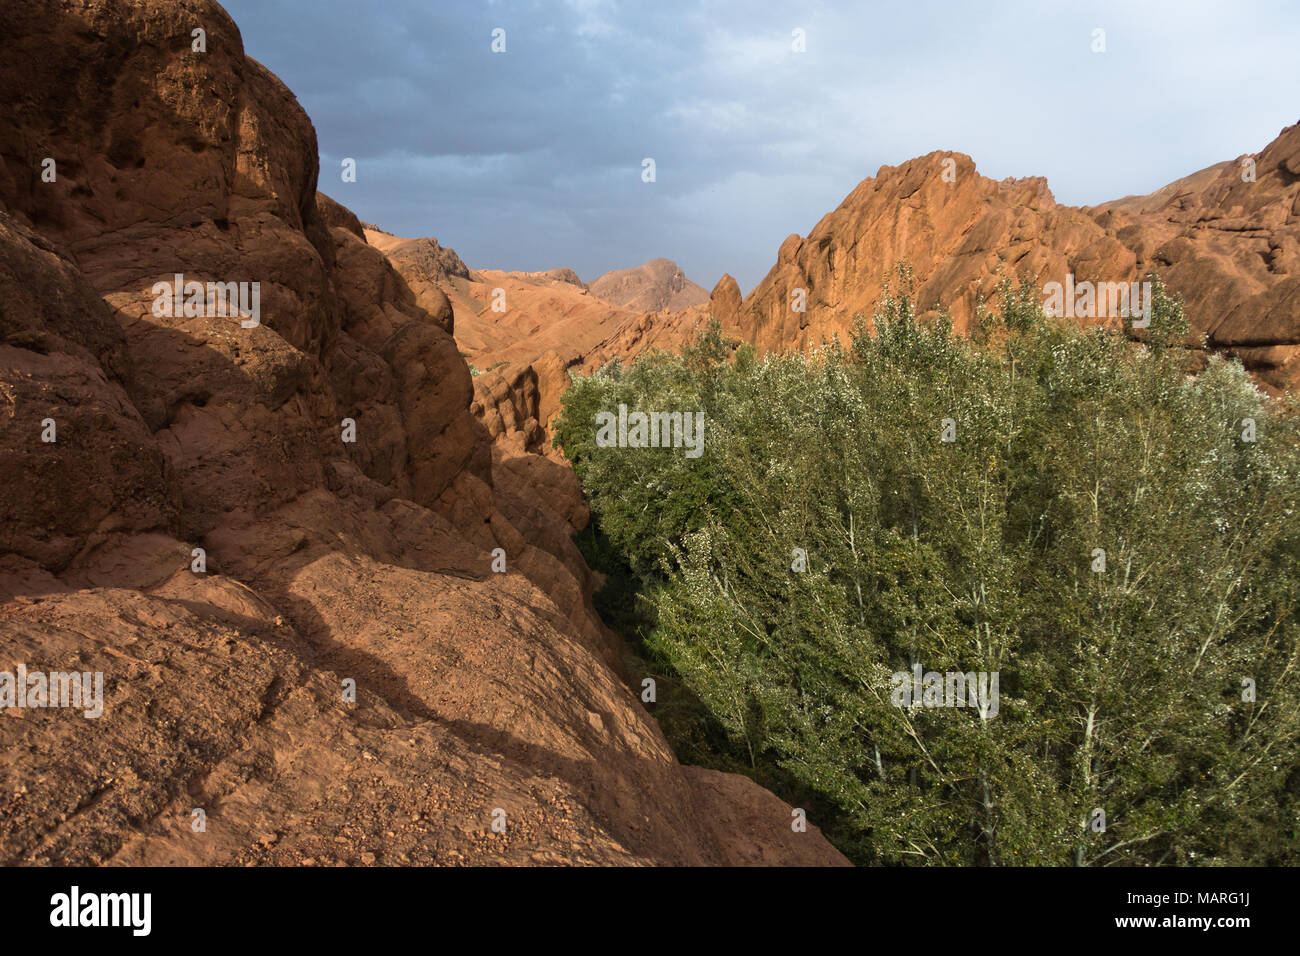 Rocky landscape at the top of Dadas Gorge in Morocco Stock Photo